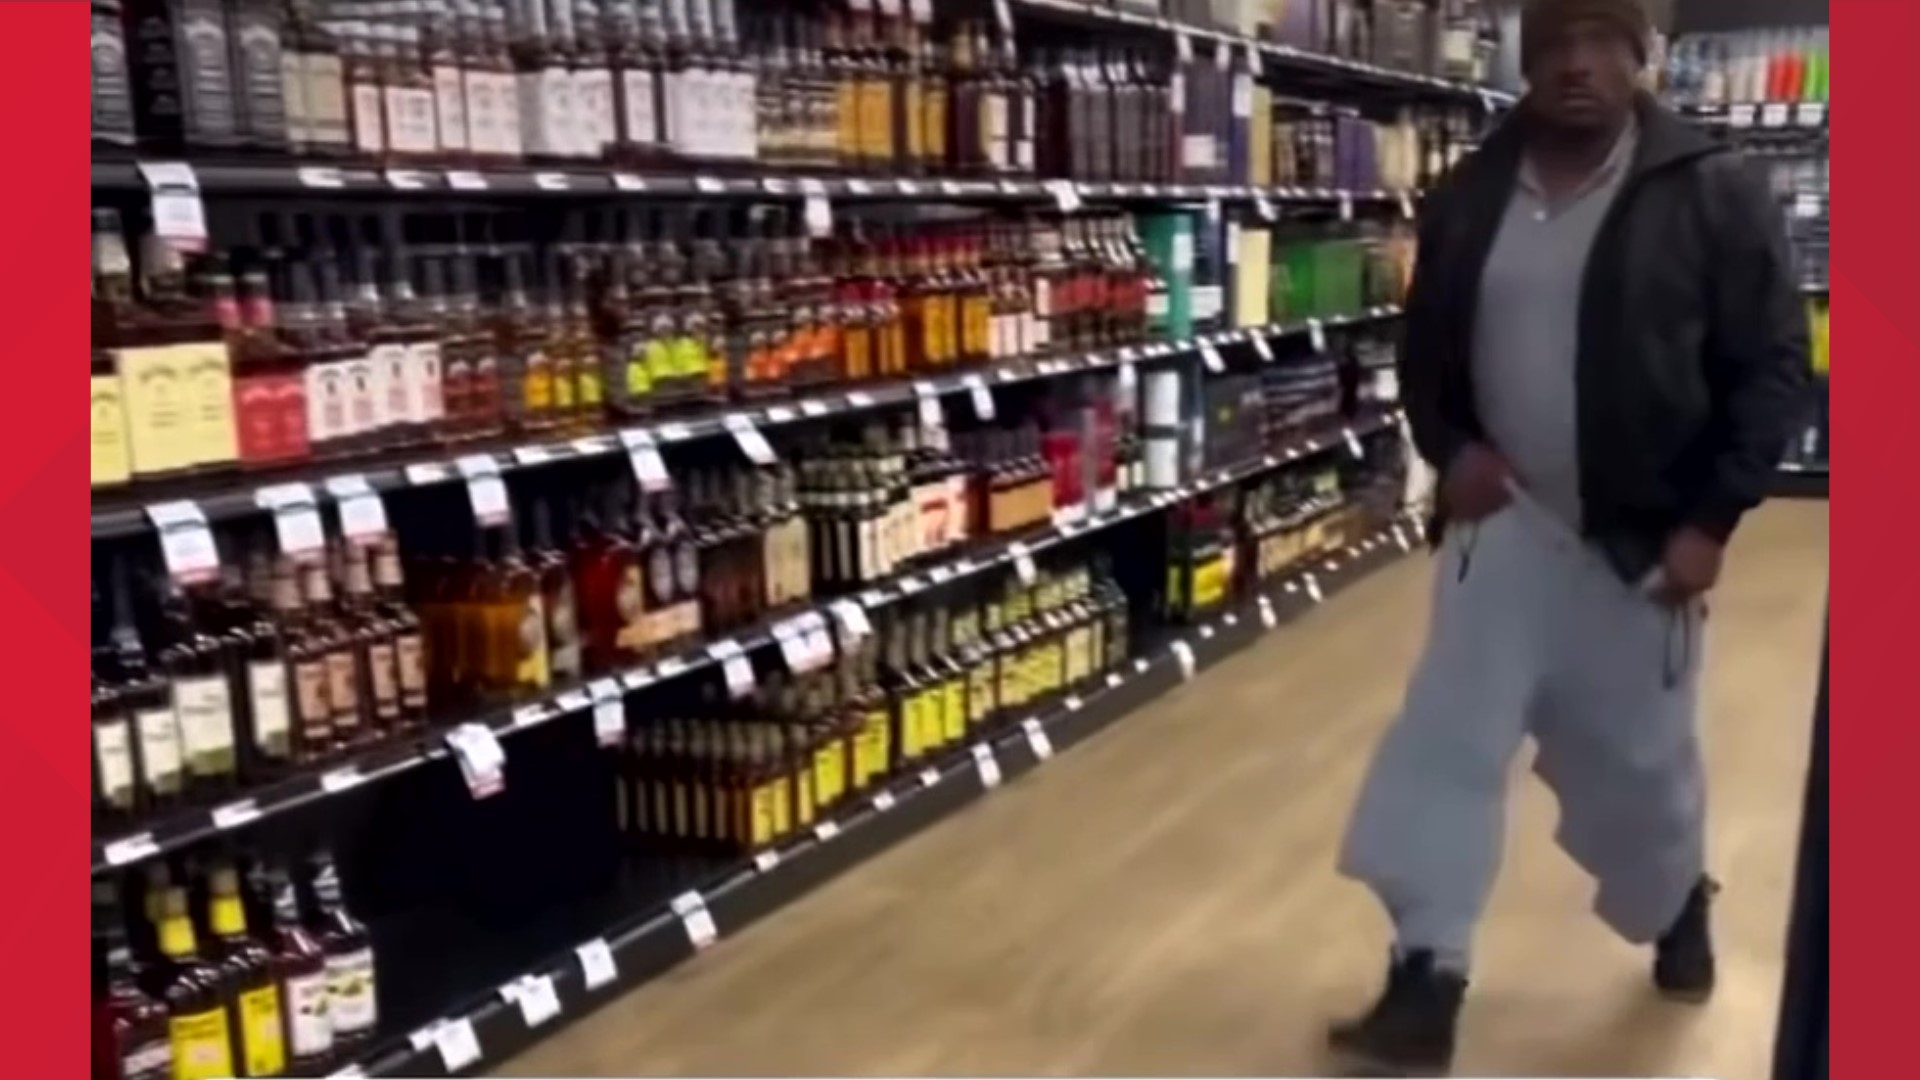 Cell phone video captures a brazen theft of liquor at a Virginia ABC Store in Portsmouth.